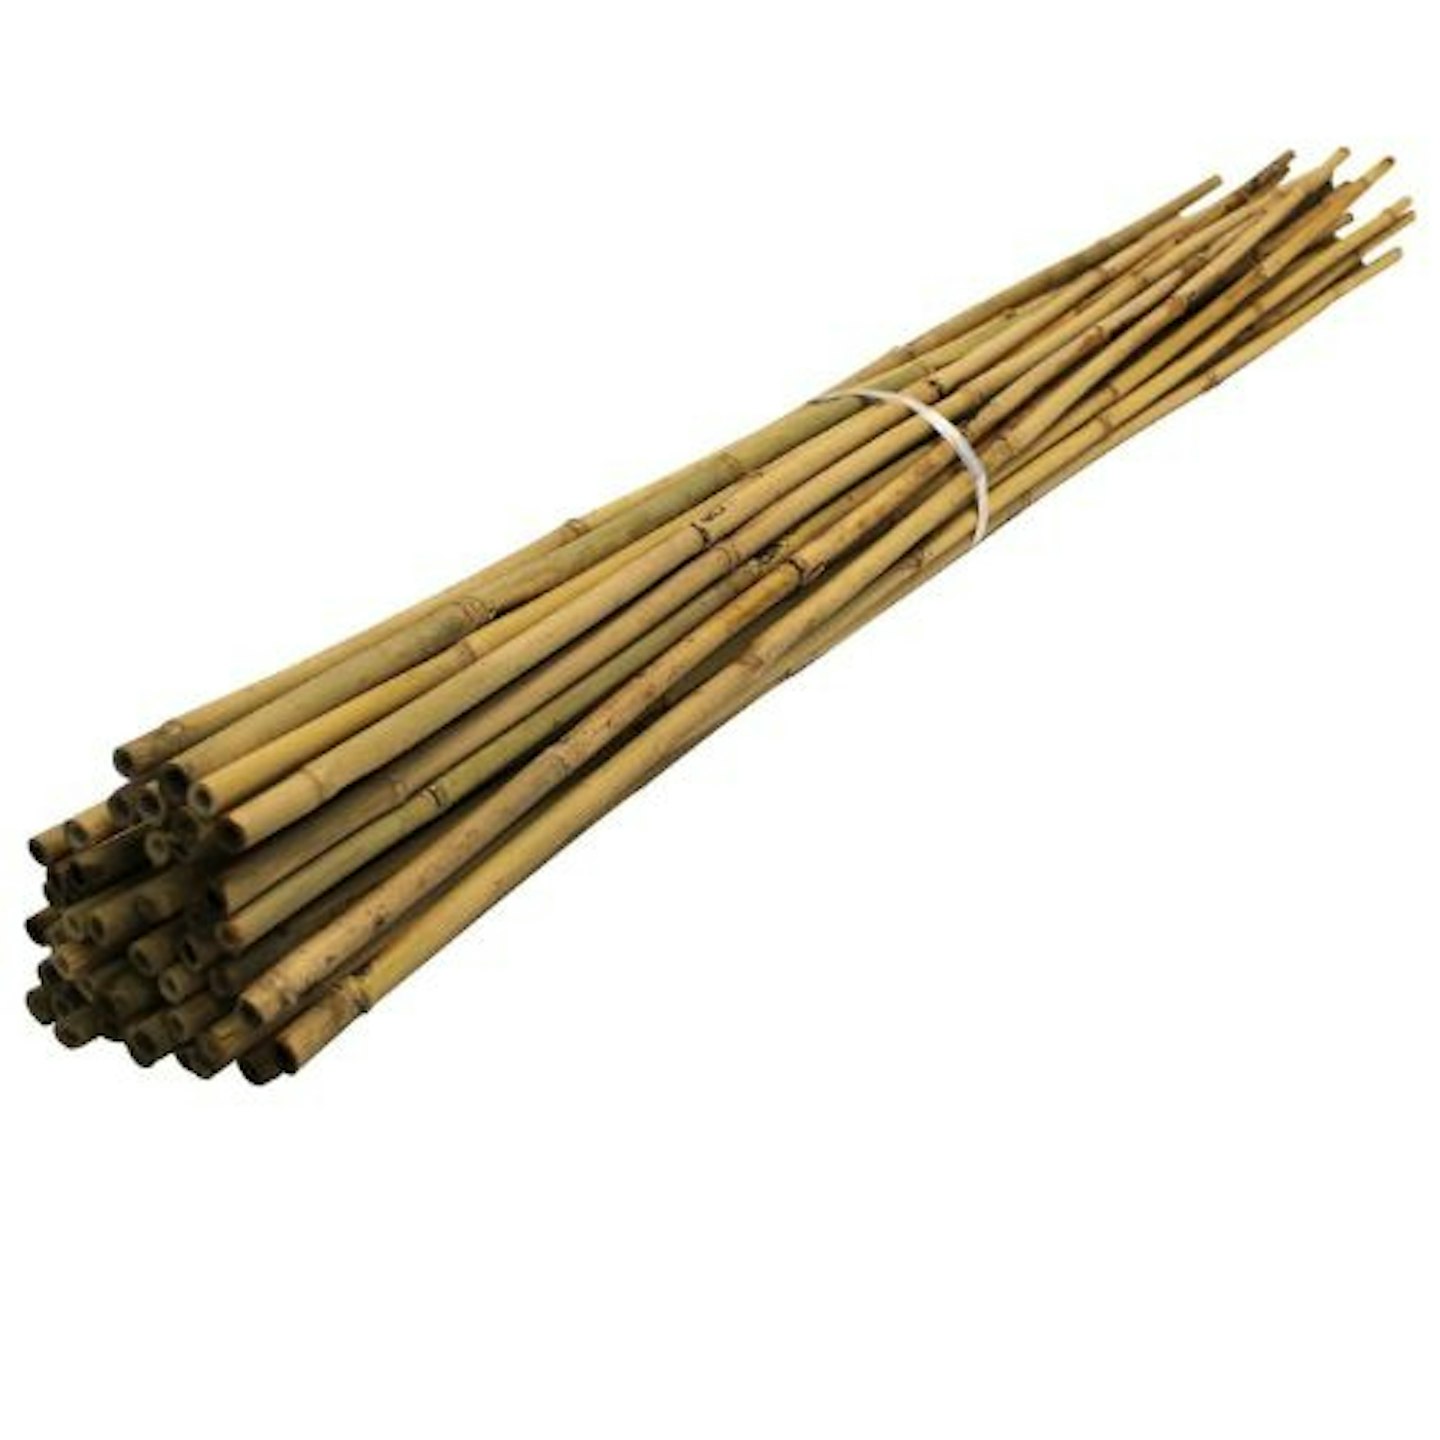 Bamboo Canes For Gardens/Plant Support | Multiple Lengths & Pack Sizes: 3ft to 12ft | Supplied by Suregreen (10, 45cm / 6-8mm)